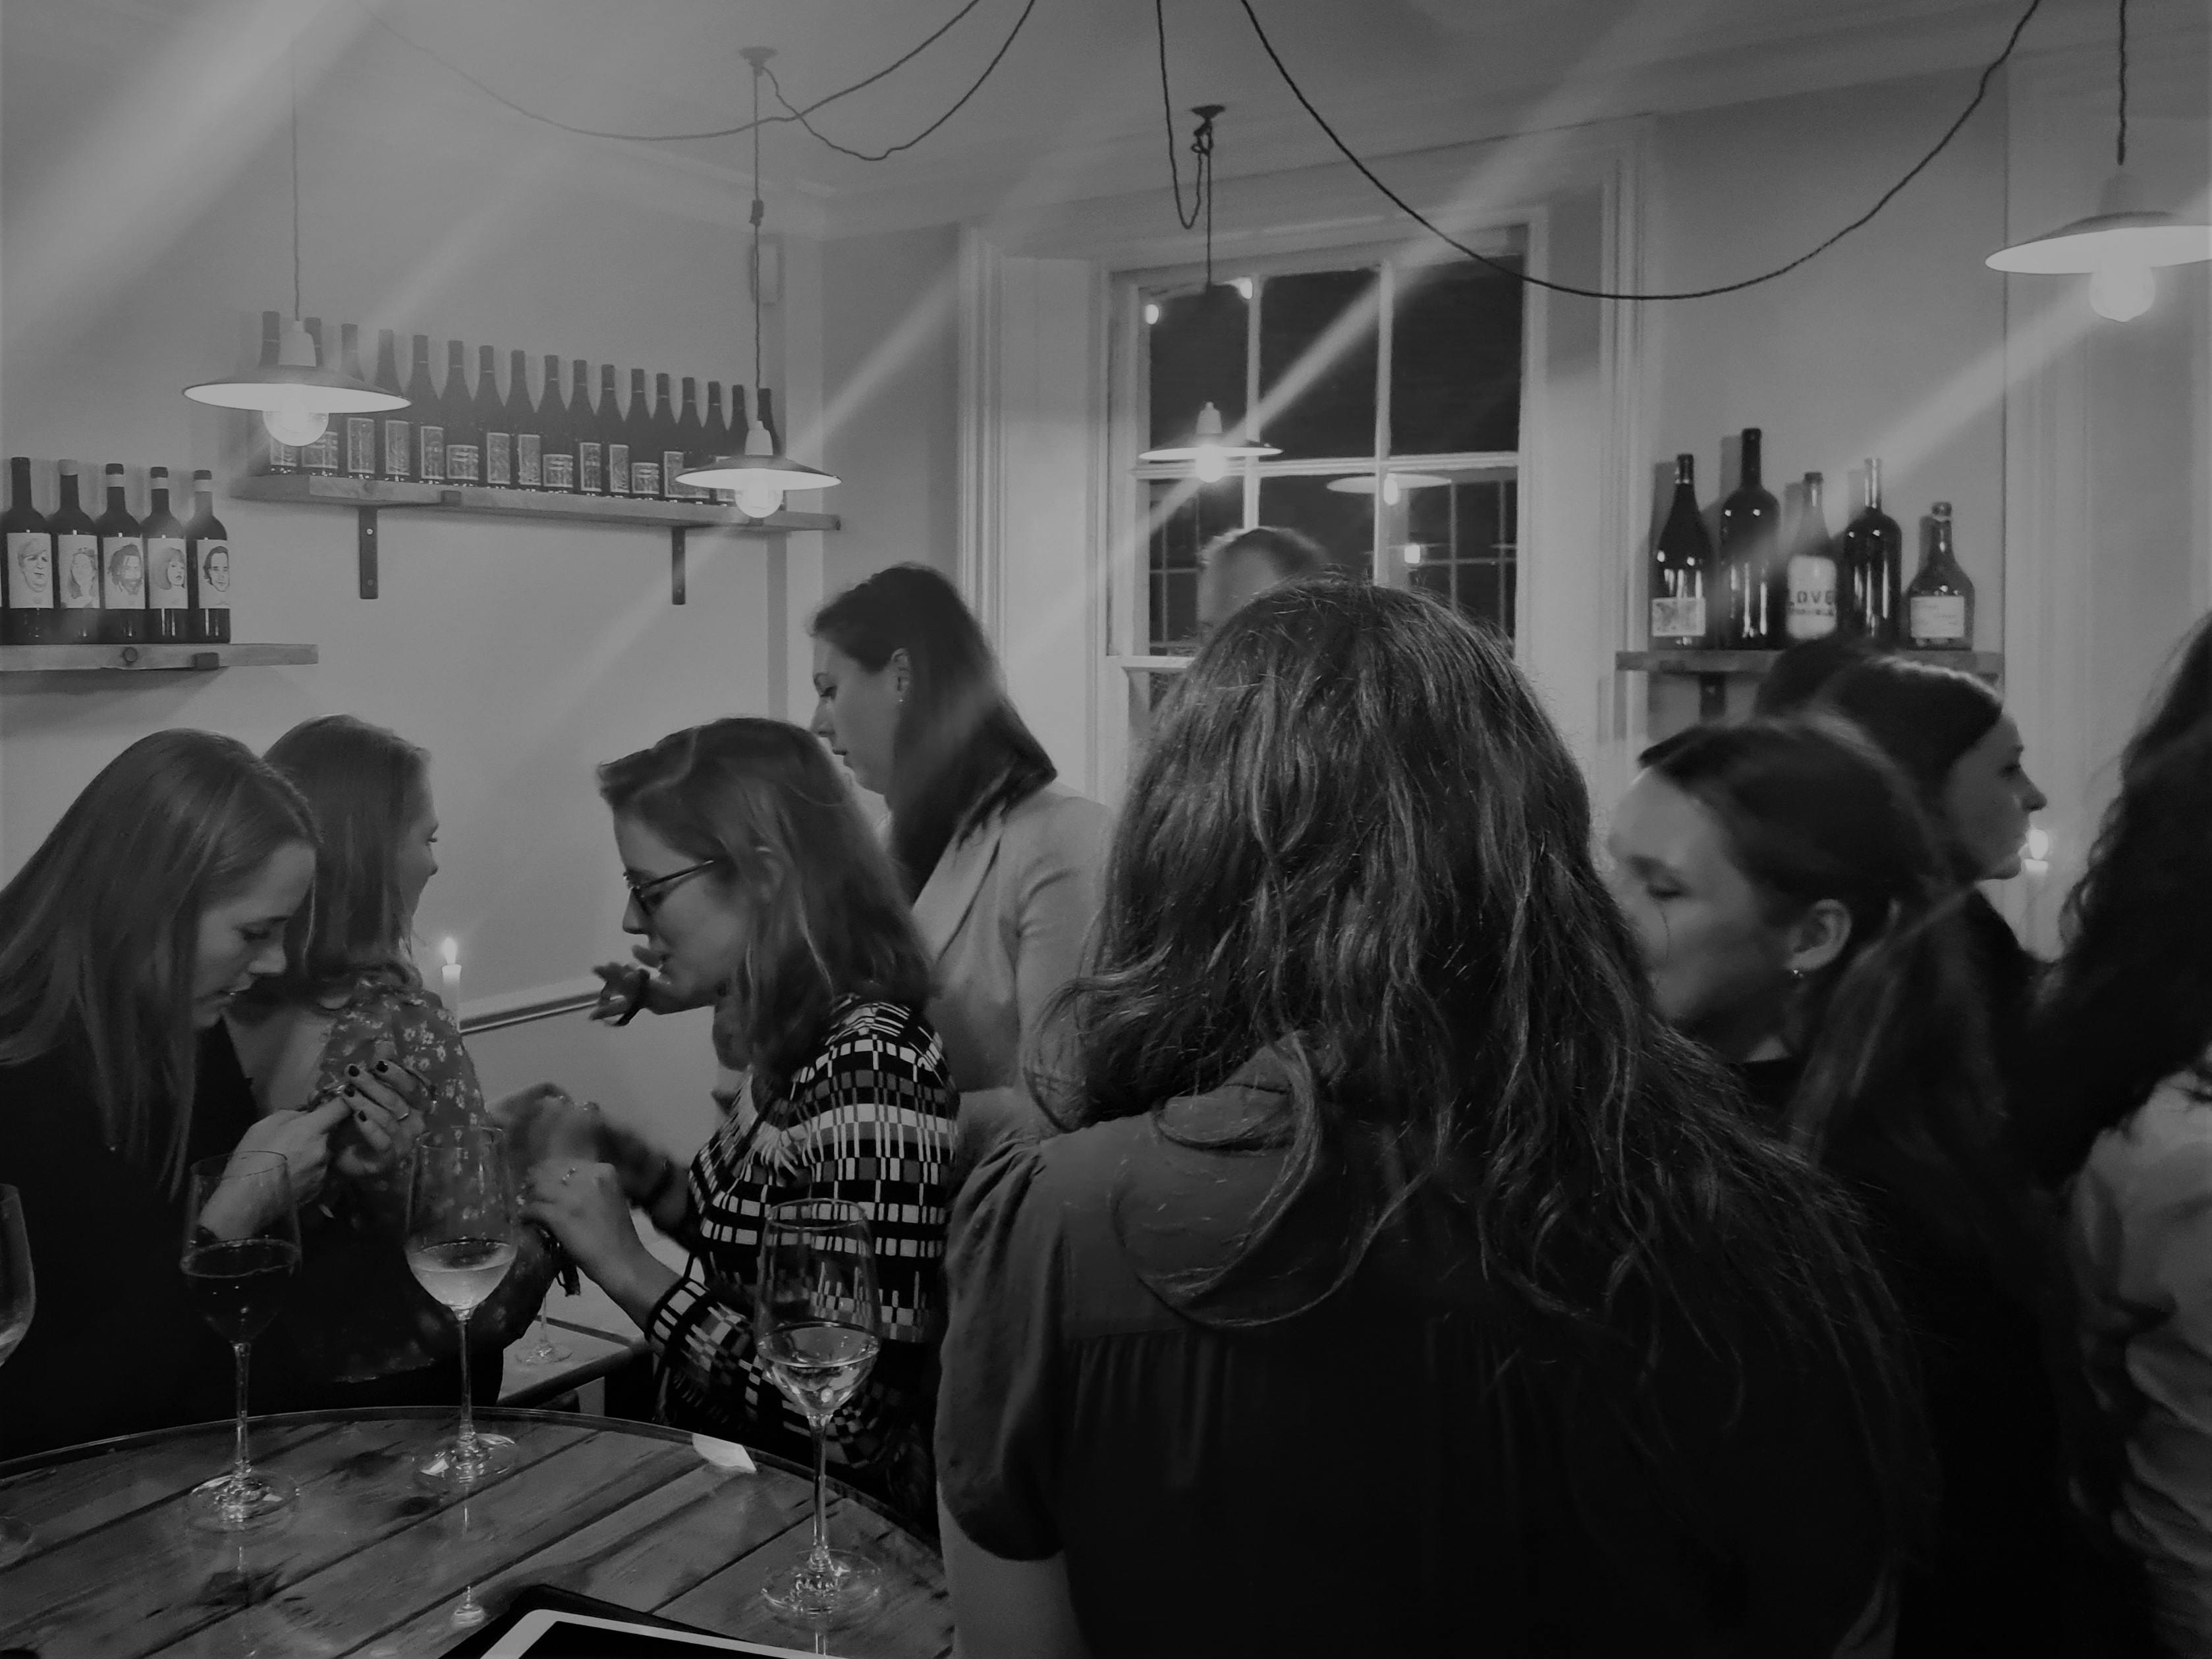 Black and white image of group of women talking in a wine bar with sparkling lights and wine bottles on shelves in the background